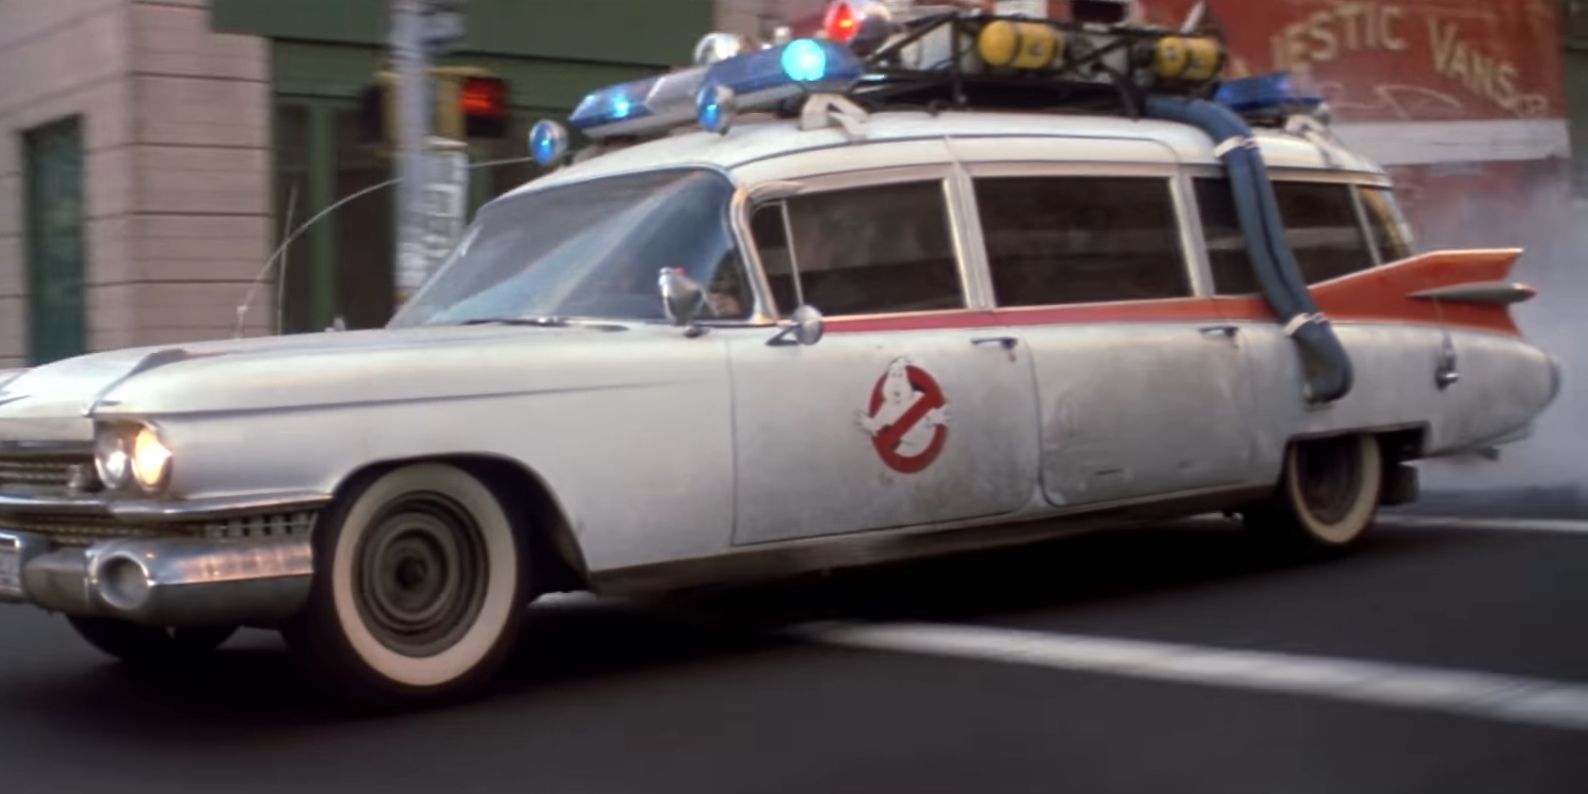 Ecto-1 driving through New York City in Ghostbusters II